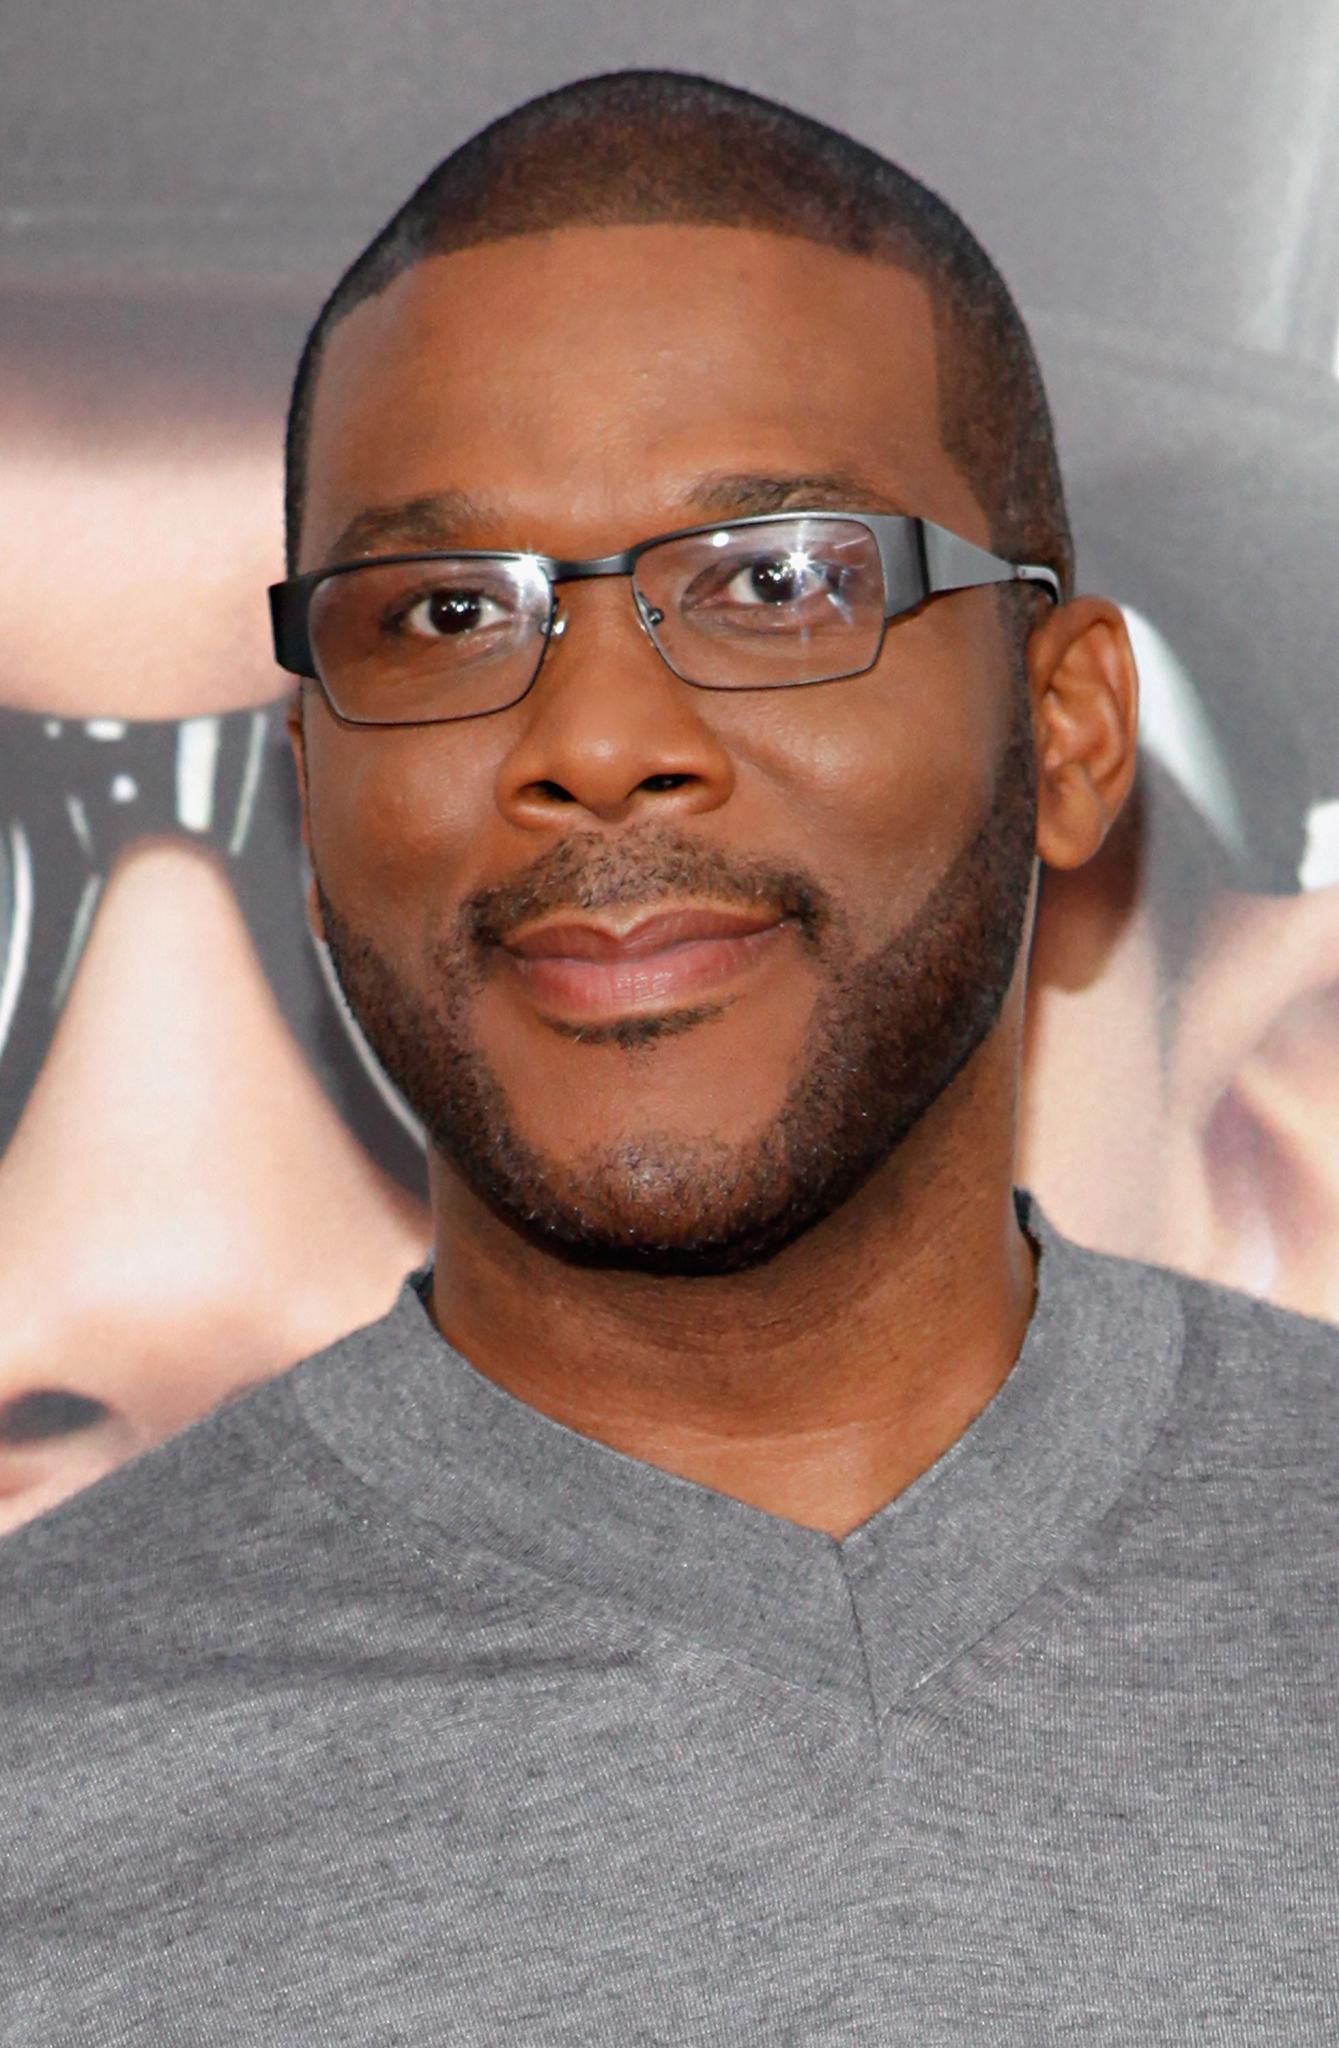 Tyler Perry Steps in to Help Evicted Atlanta Family